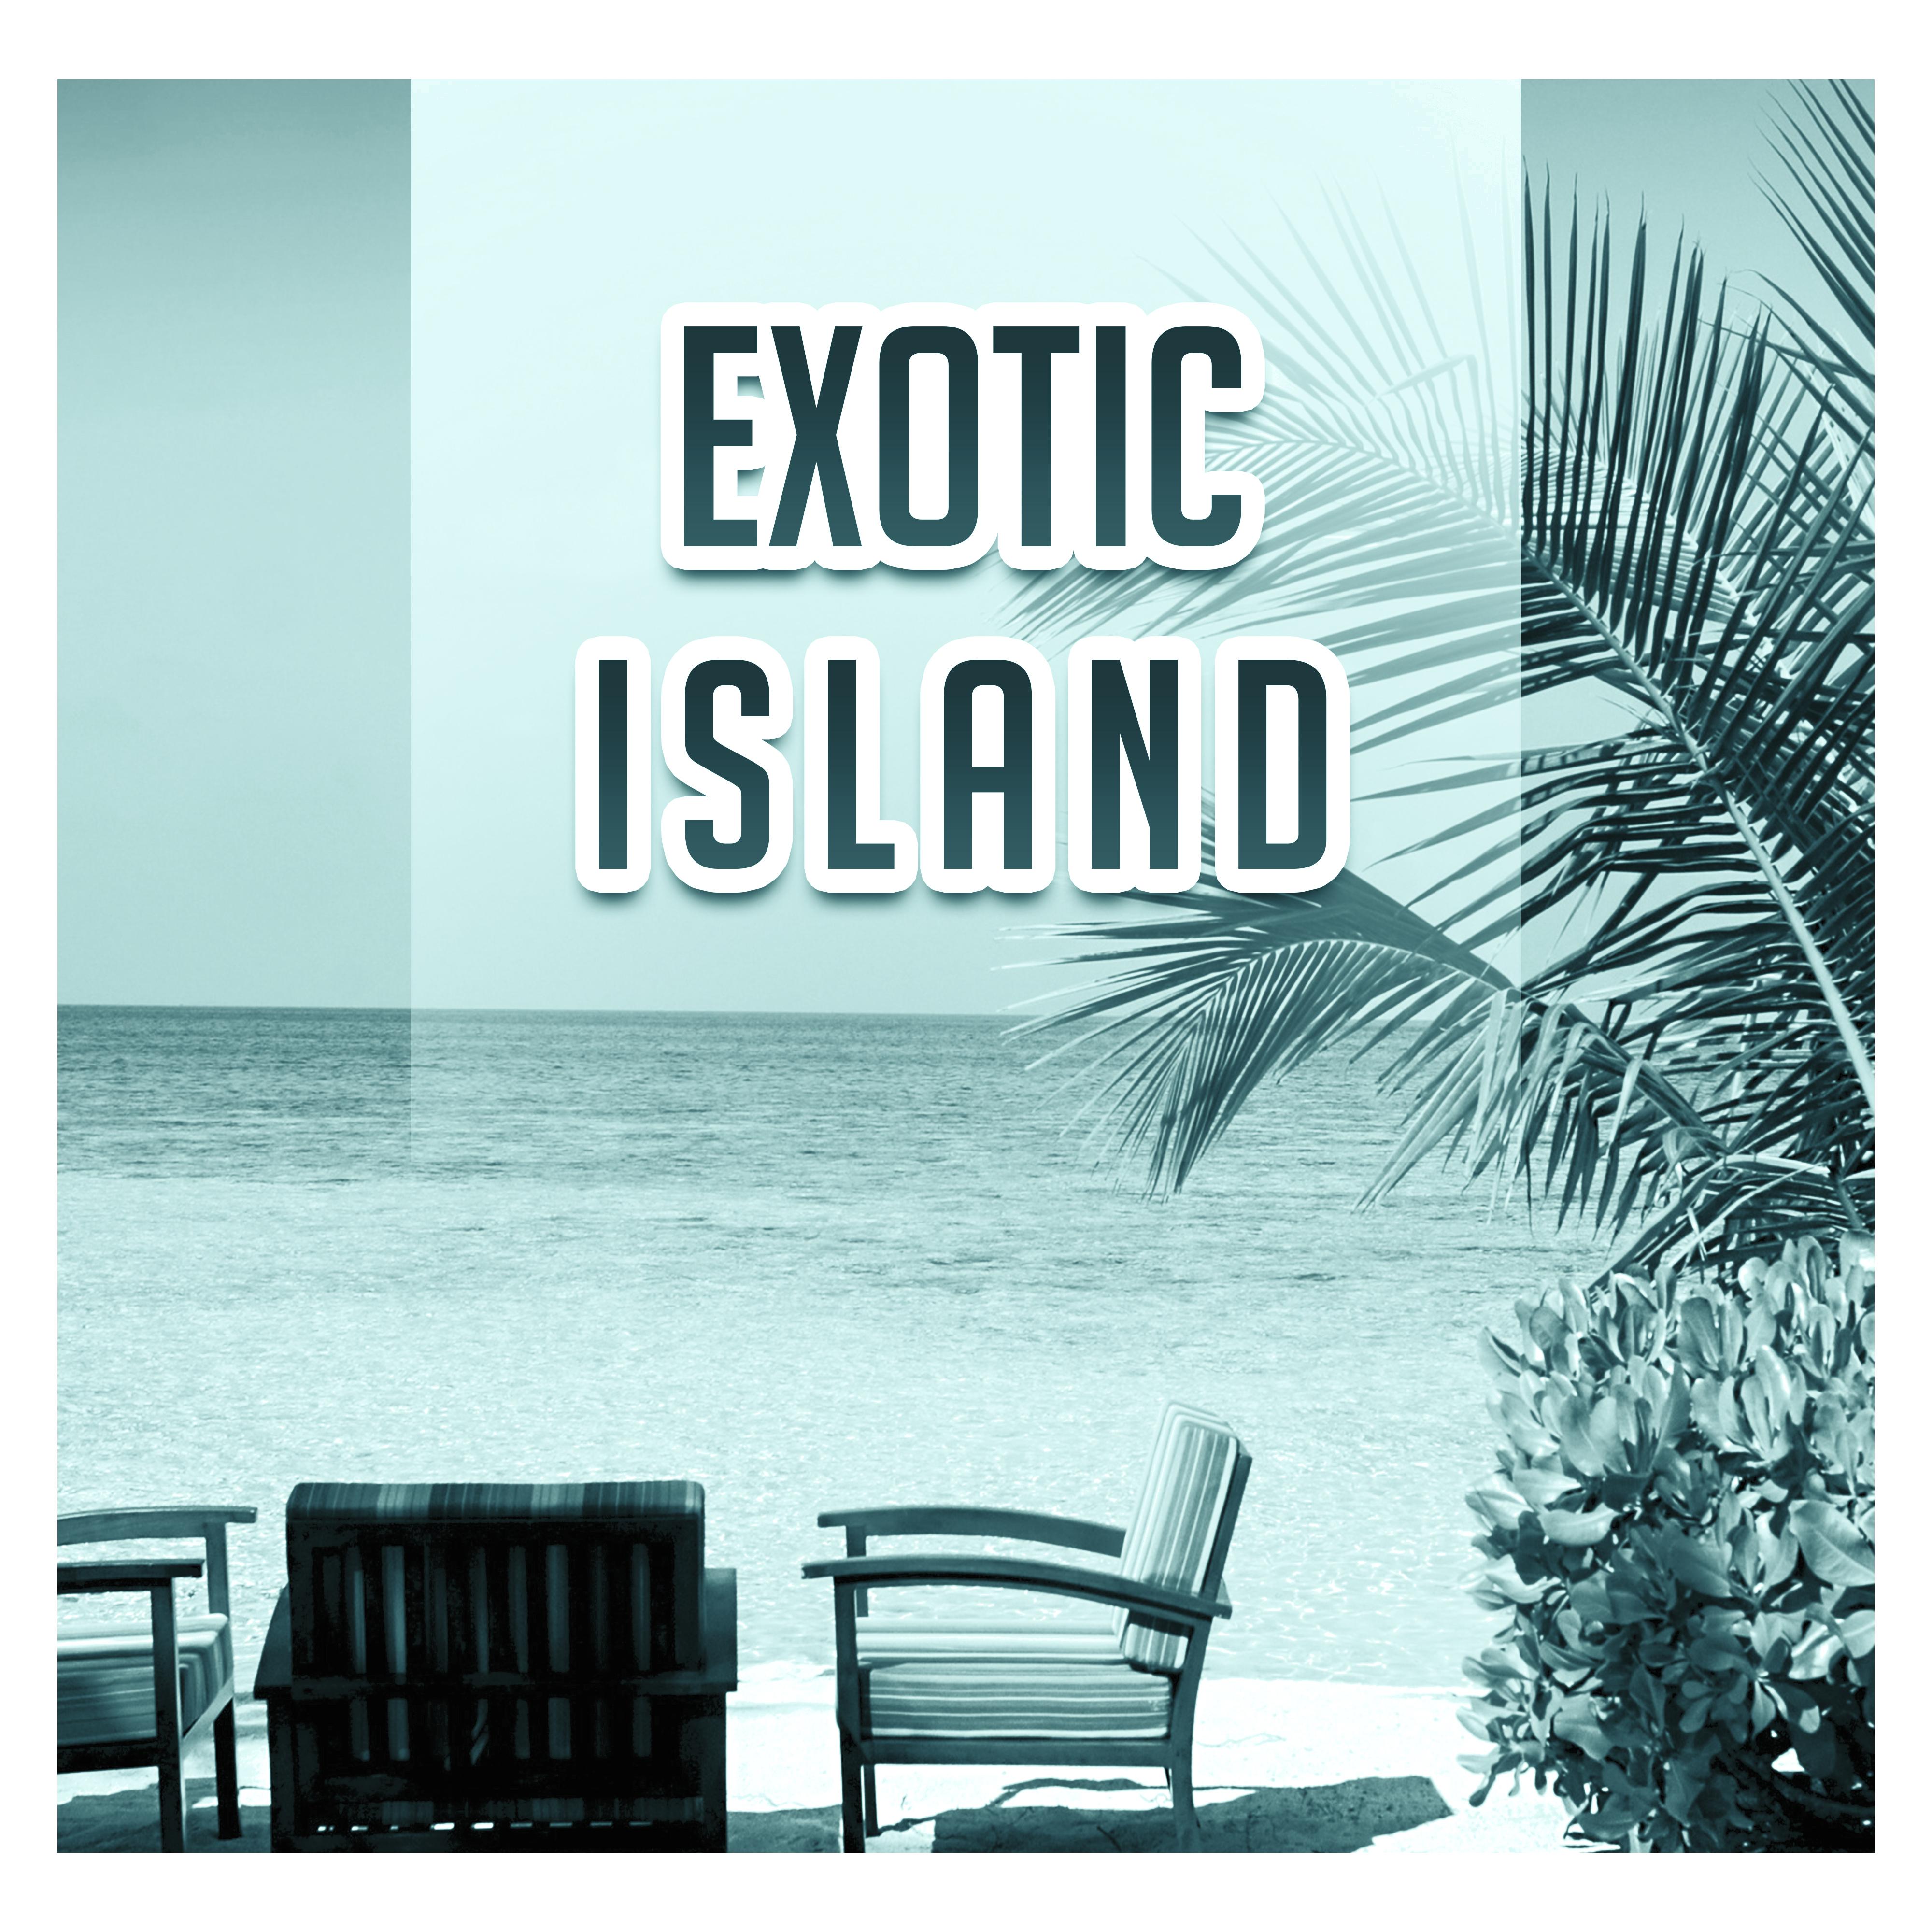 Exotic Island – Beach Chill, Summertime, Relaxing Waves, Peaceful Mind, Sea, Water, Pure Rest, Stress Relief